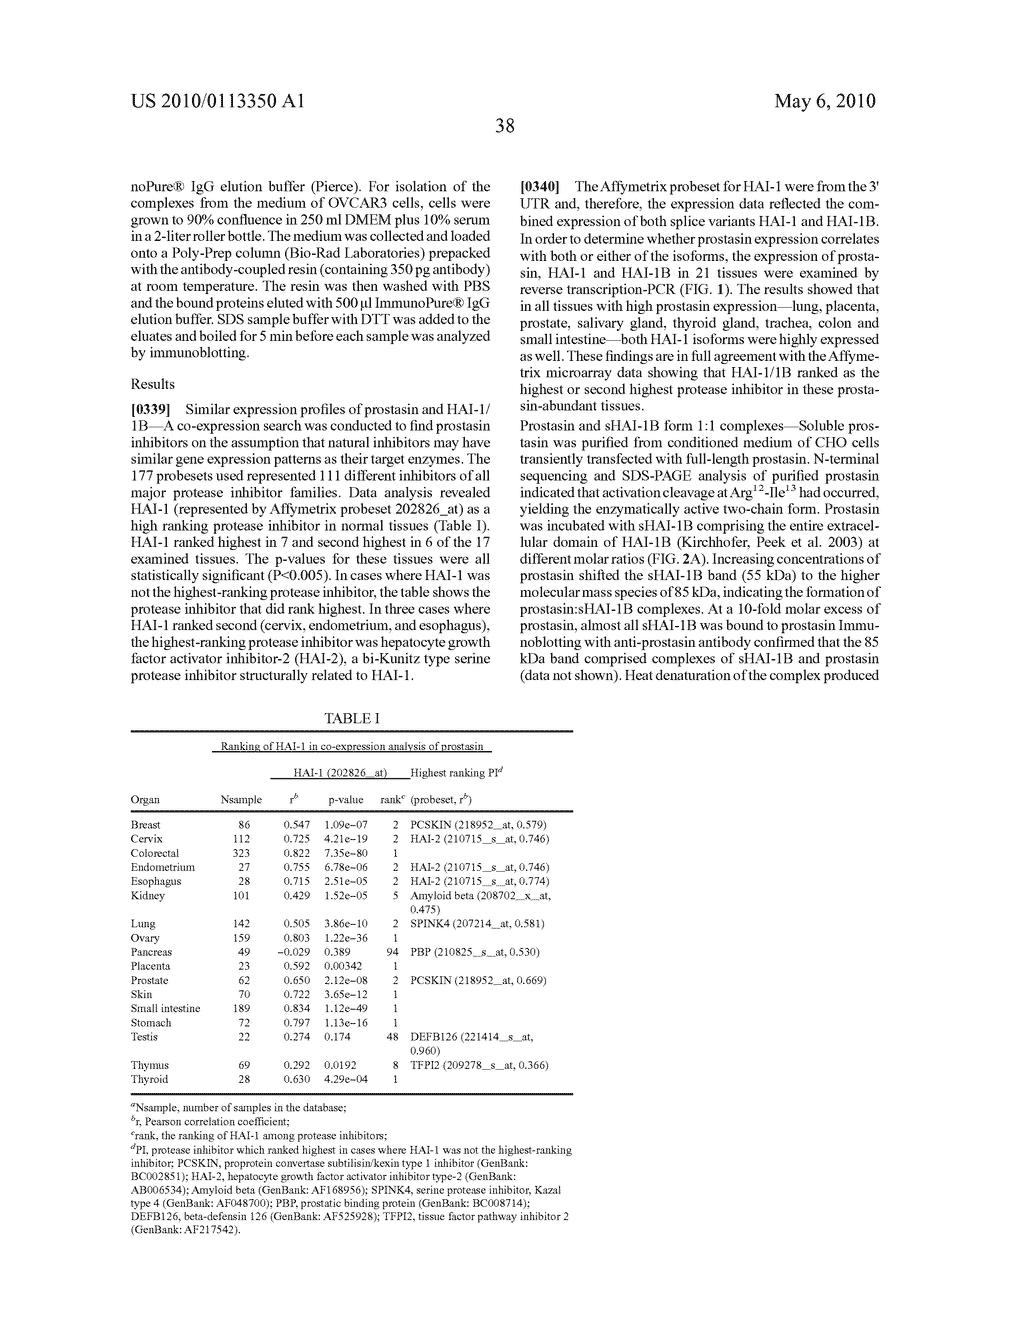 METHODS AND COMPOSITIONS FOR MODULATING PROSTASIN - diagram, schematic, and image 45